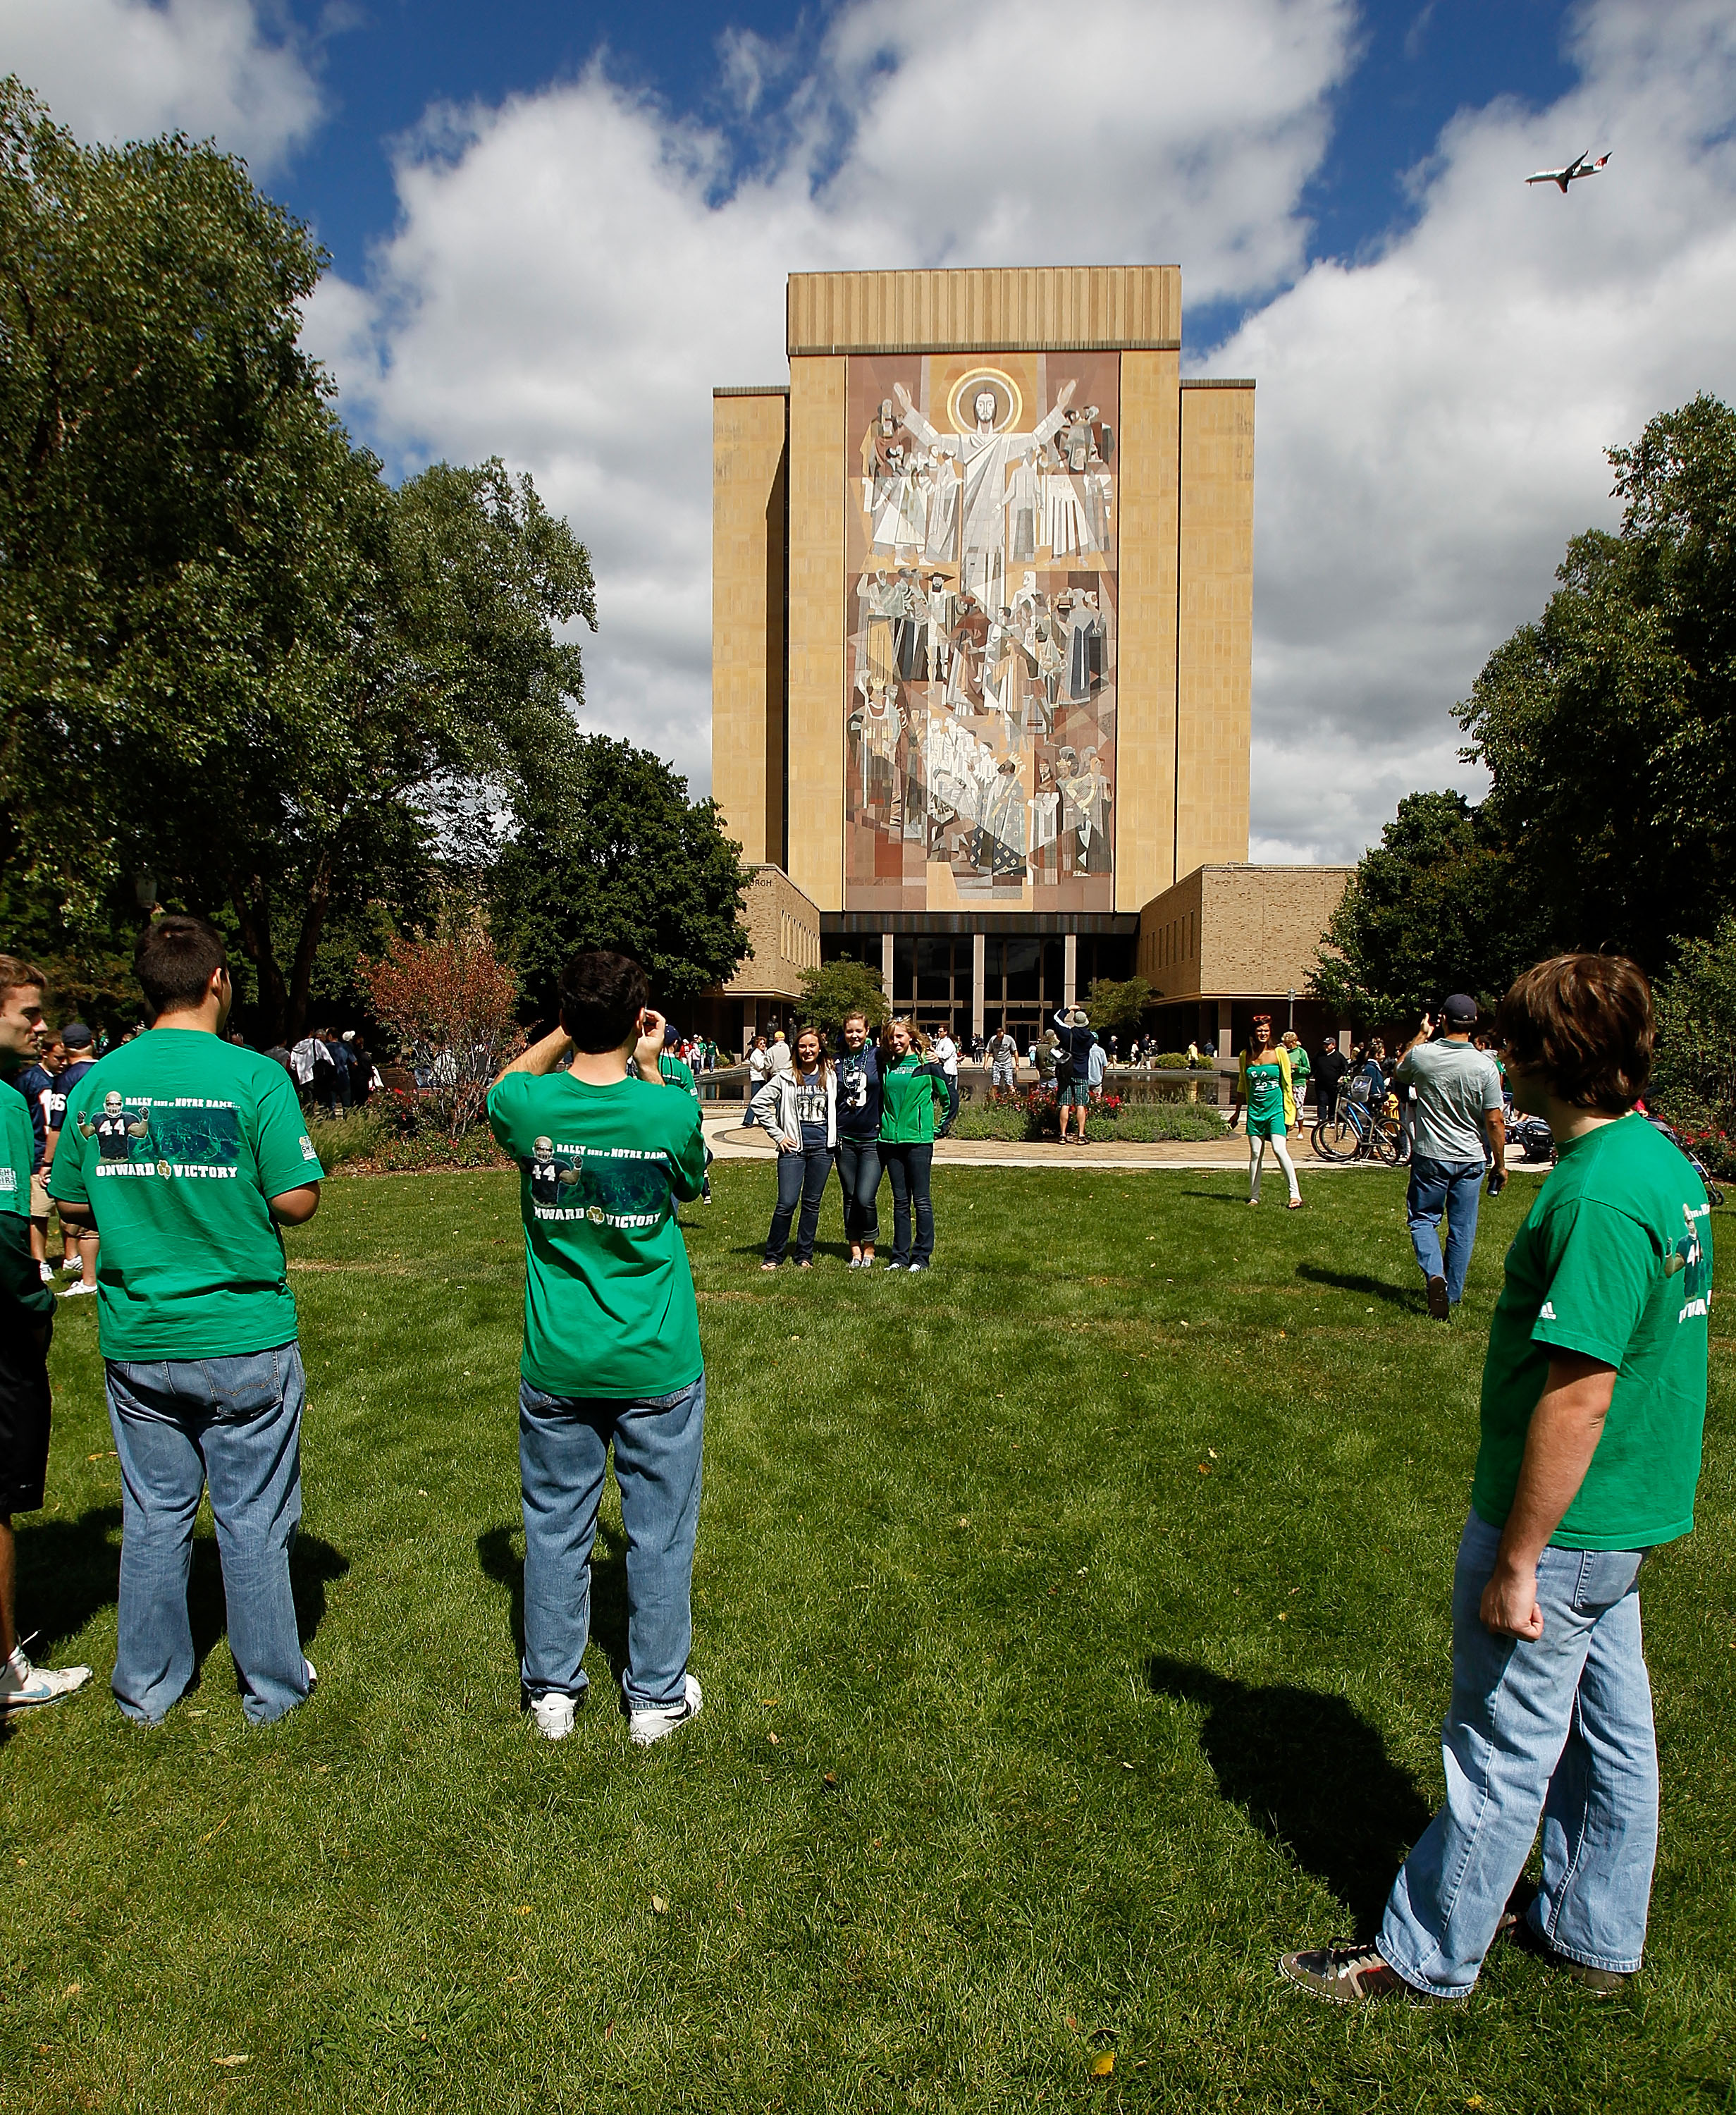 SOUTH BEND, IN - SEPTEMBER 04: Fans take pictures in front of the 'Way of Life' mural, also known as 'Touchdown Jesus,' on the campus of Notre Dame University before a game between the Notre Dame Fighting Irish and the Purdue Boilermakers at Notre Dame St